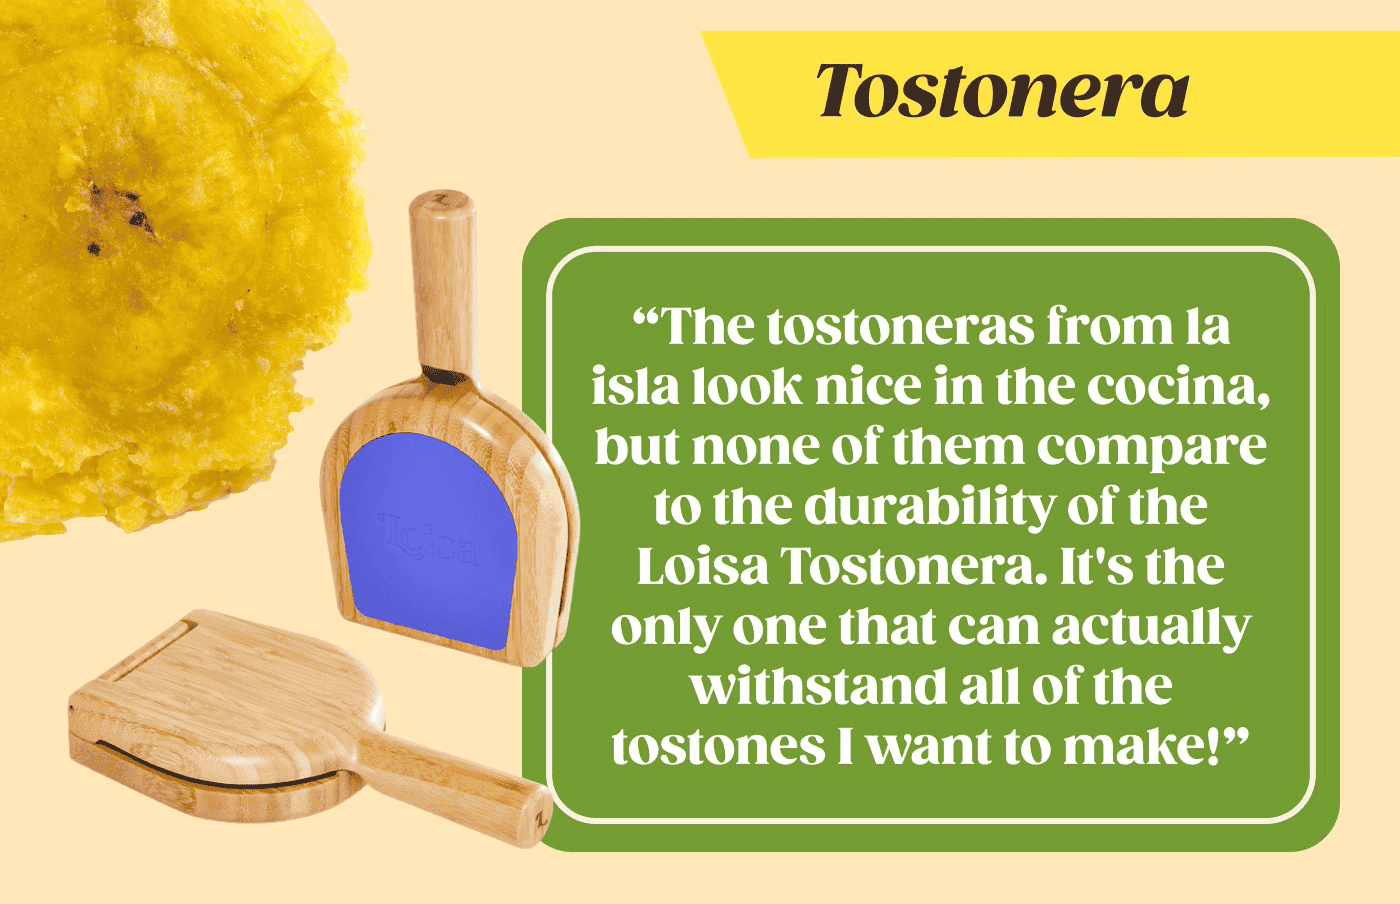 Tostonera "The tostoneras from la isla look nice in the cocina, but none of them compare to the durability of the Loisa Tostonera. It's the only one that can actually withstand all of the tostones I want to make!" We added them all to a cart to make checkout easy 😉